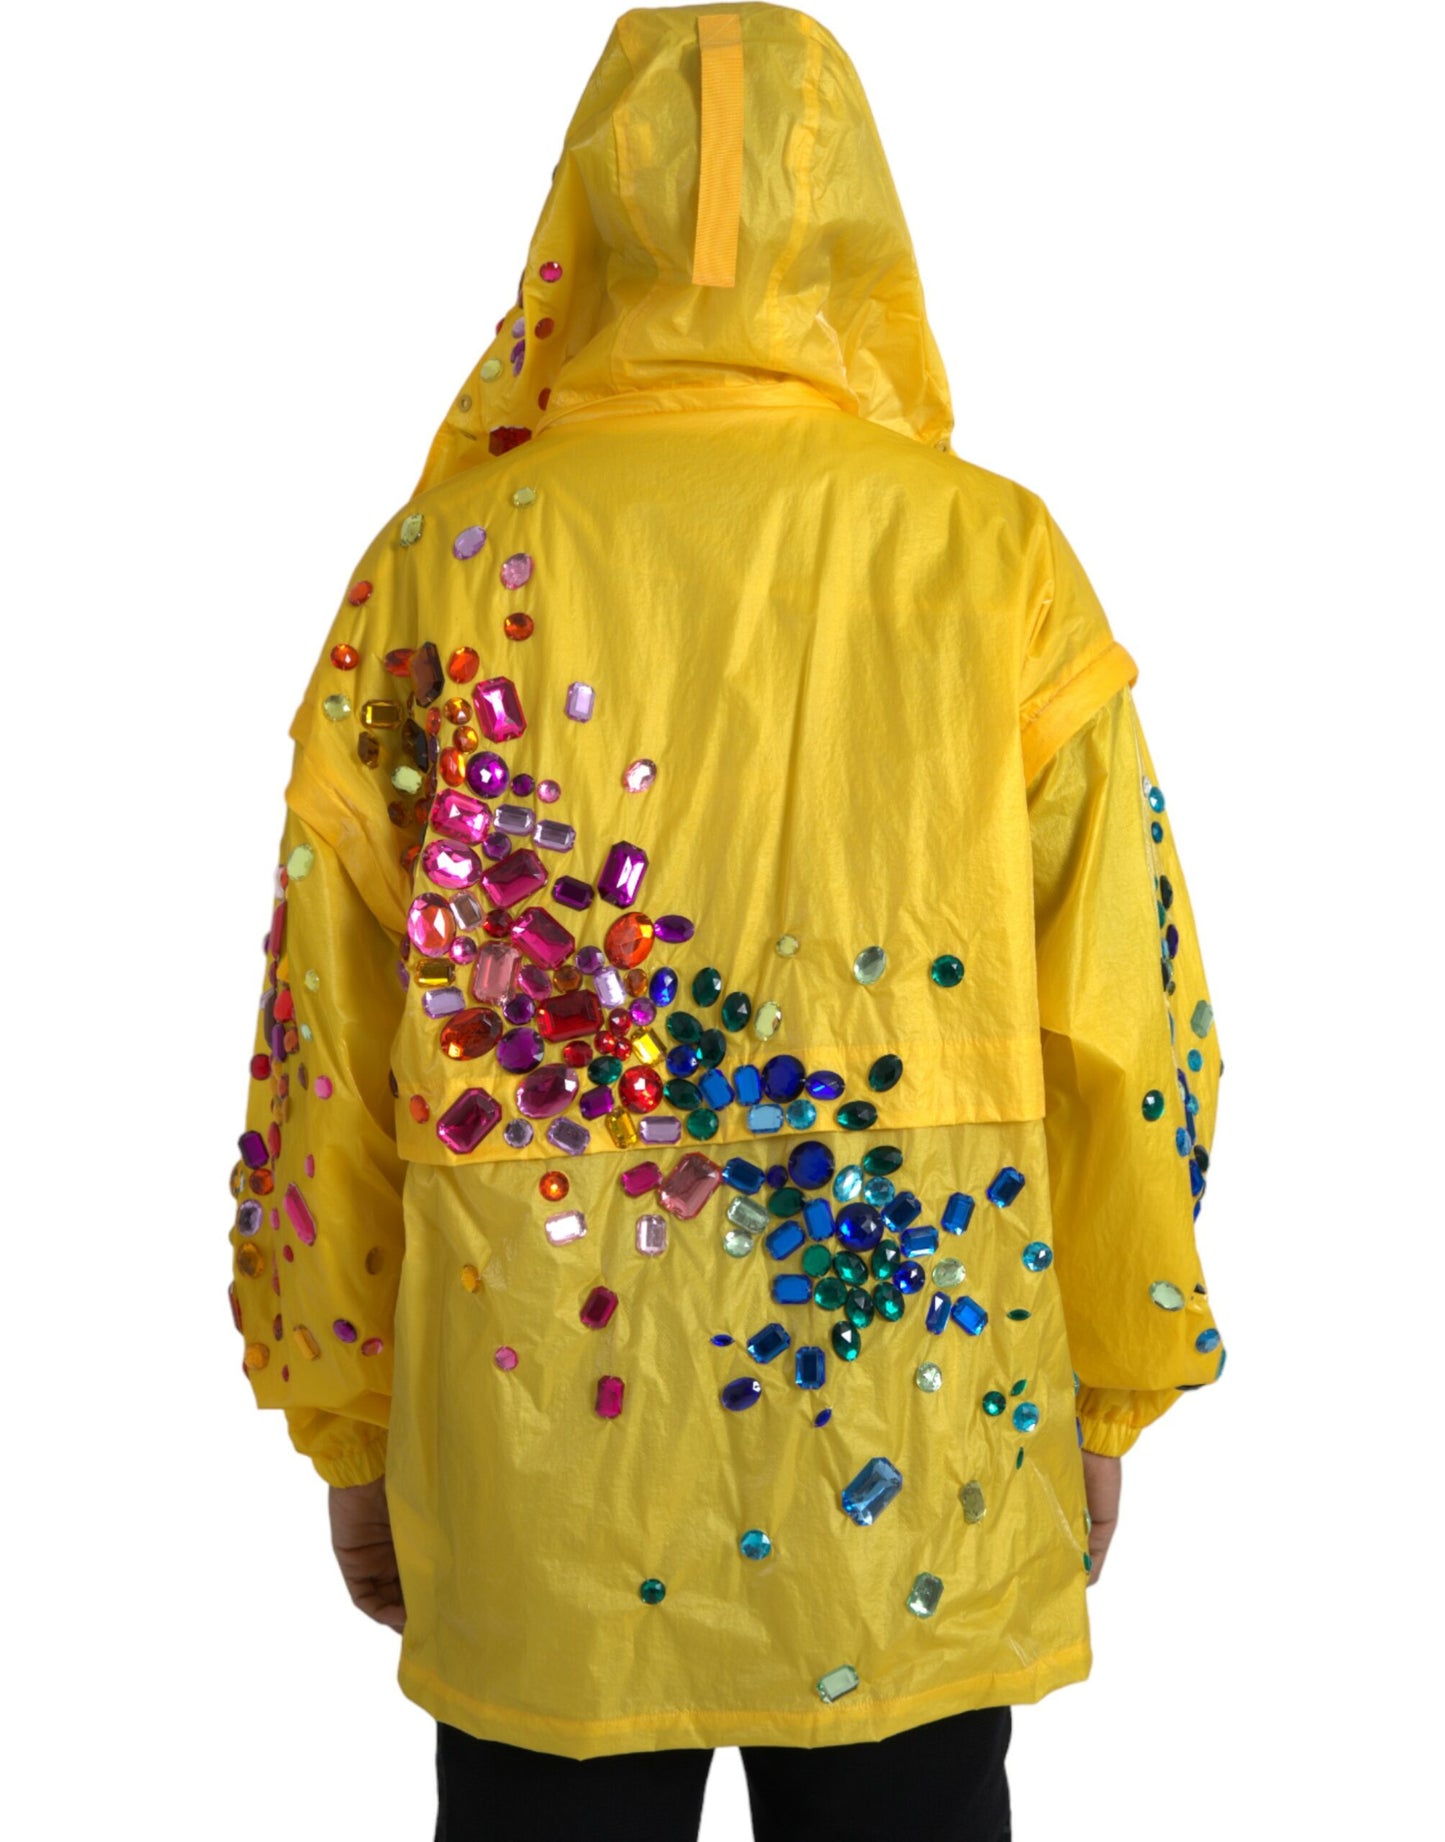 Dolce & Gabbana Yellow Crystal Embellished Hooded Jacket - Gio Beverly Hills